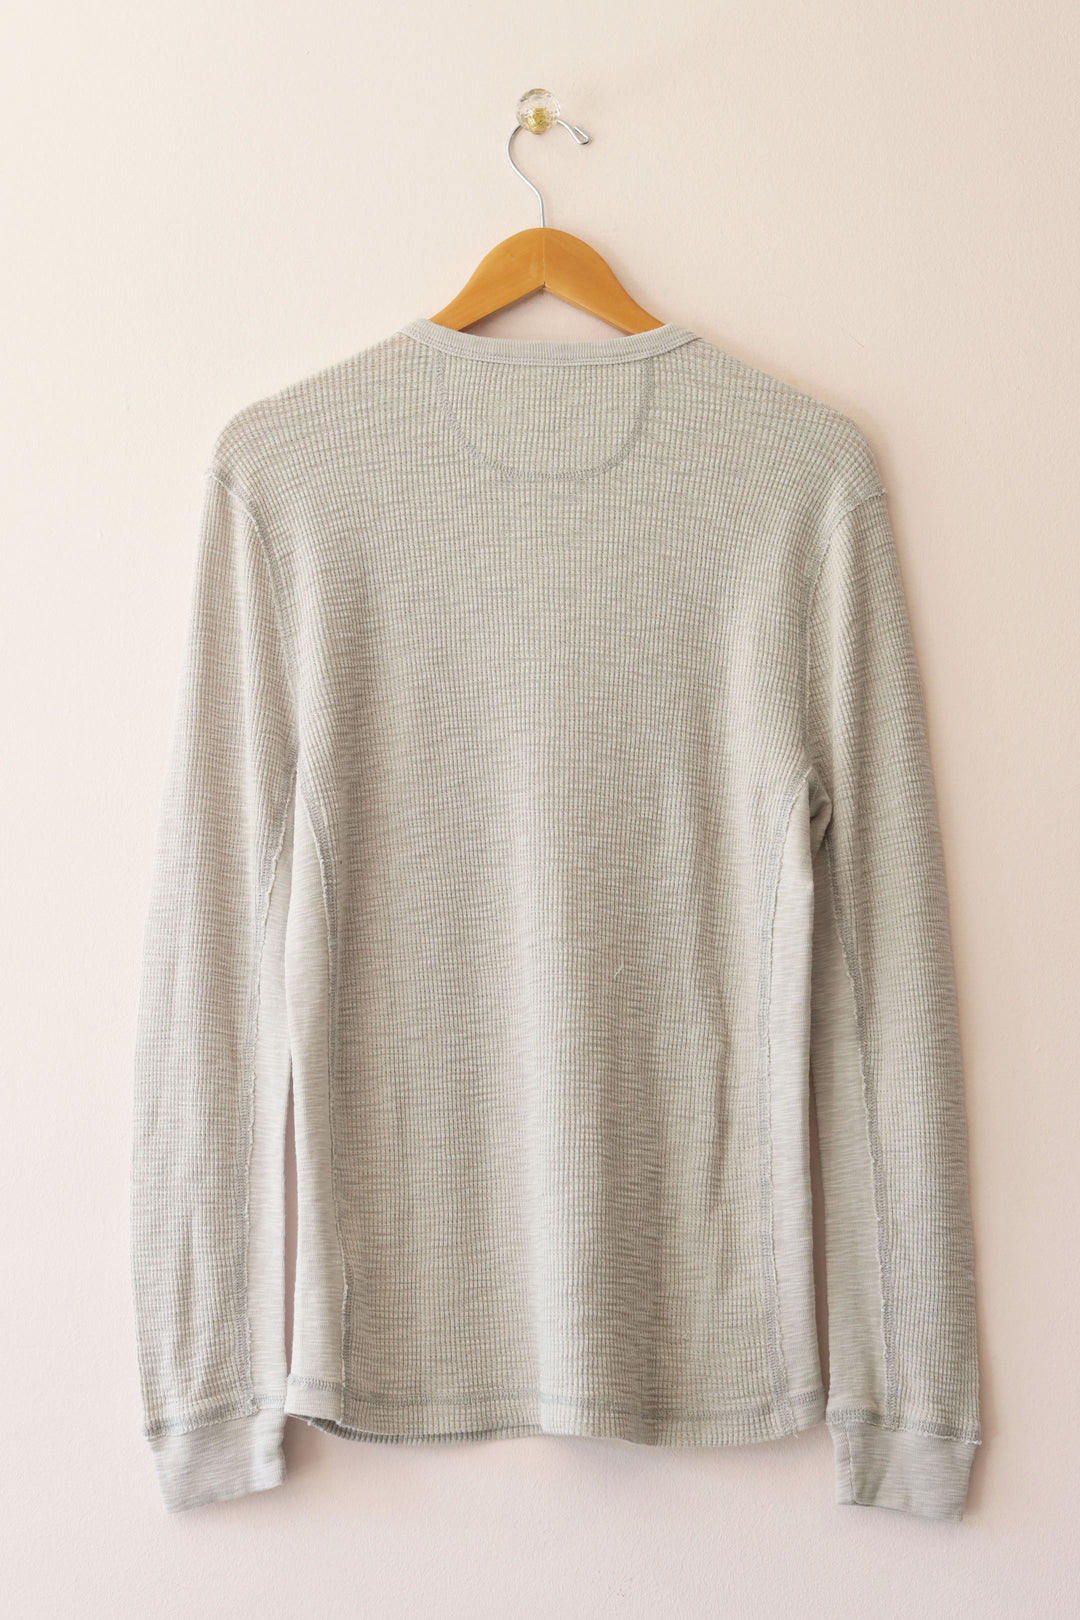 BOWERY WAFFLE THERMAL HENLEY - Kingfisher Road - Online Boutique